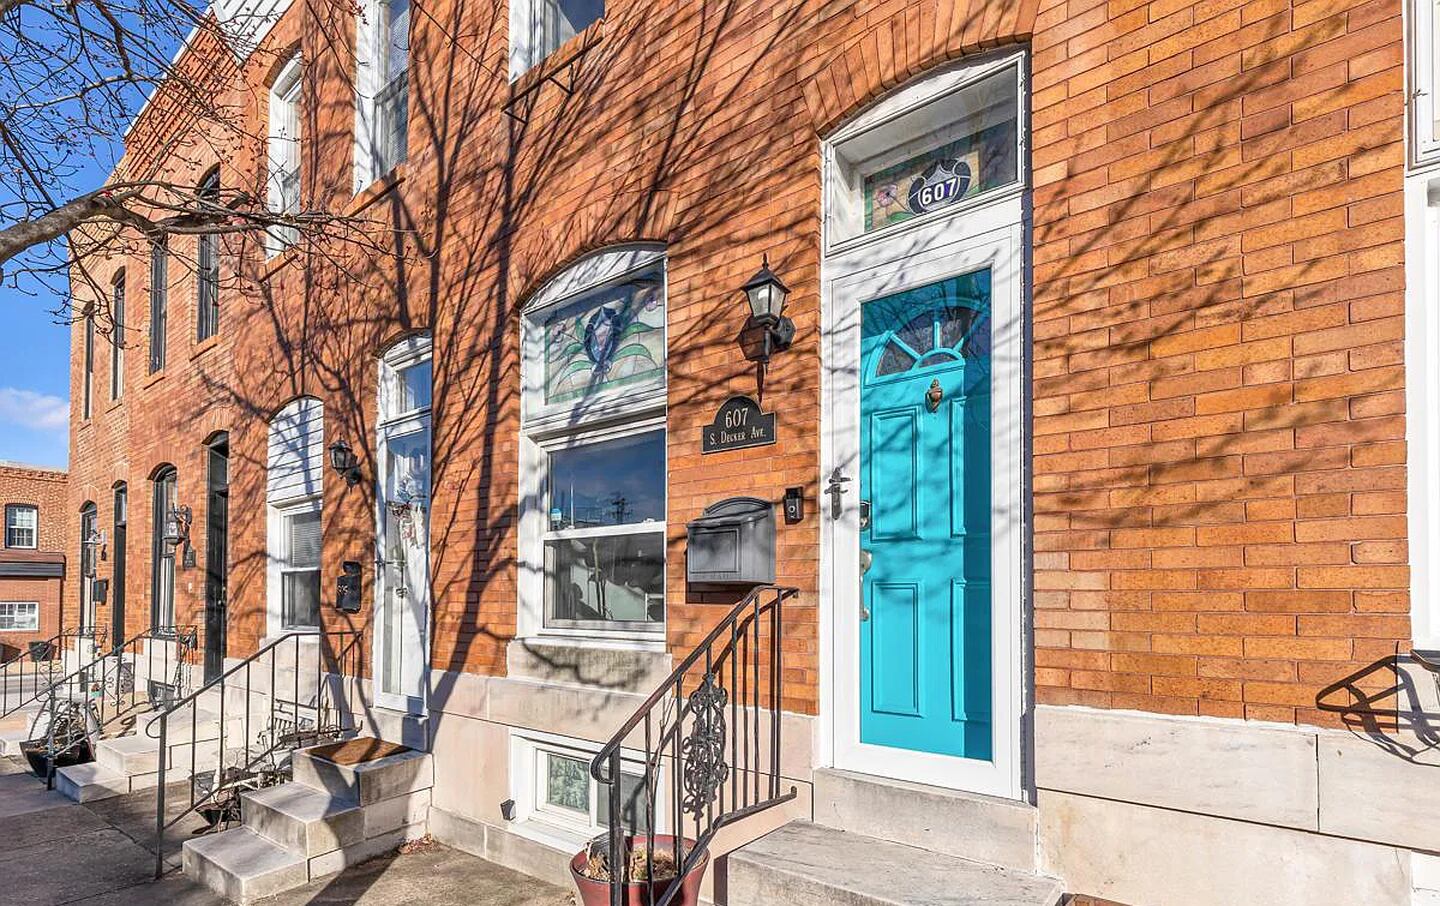 An exterior shot of a brick rowhouse in daylight, with the shadow of a bare tree. The front door to the featured rowhouse is light blue.